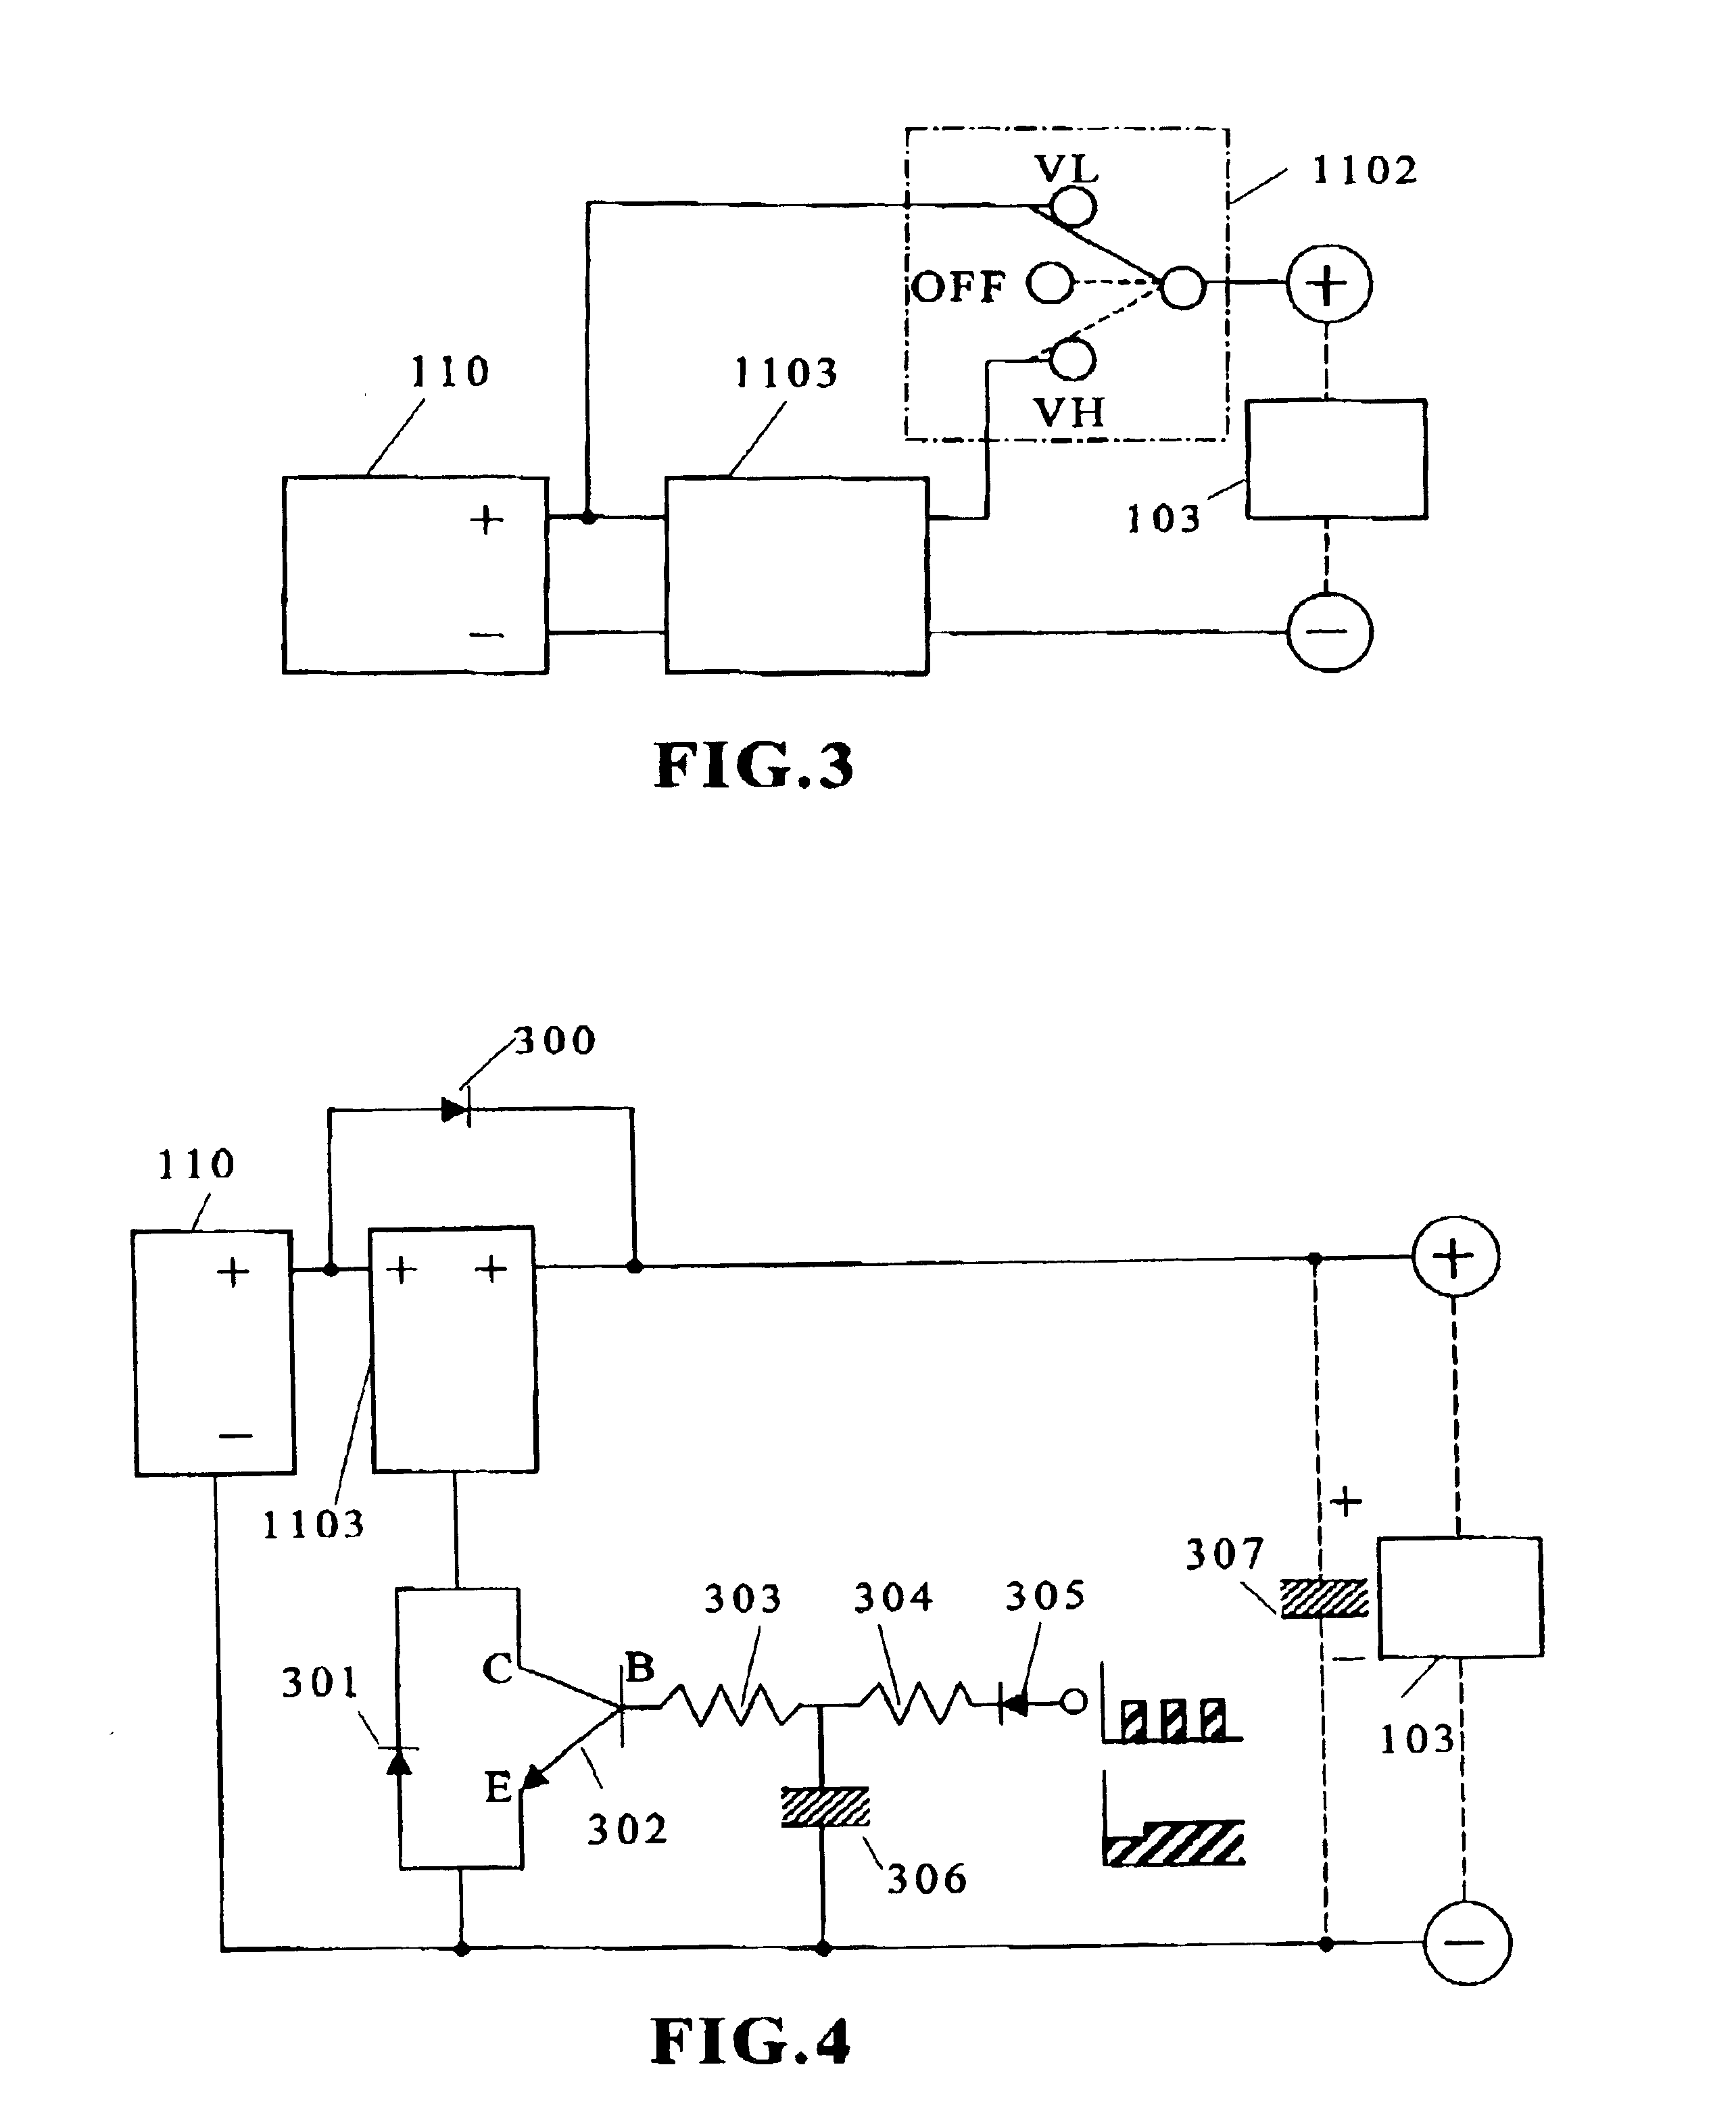 Wireless information device with its transmission power level adjustable